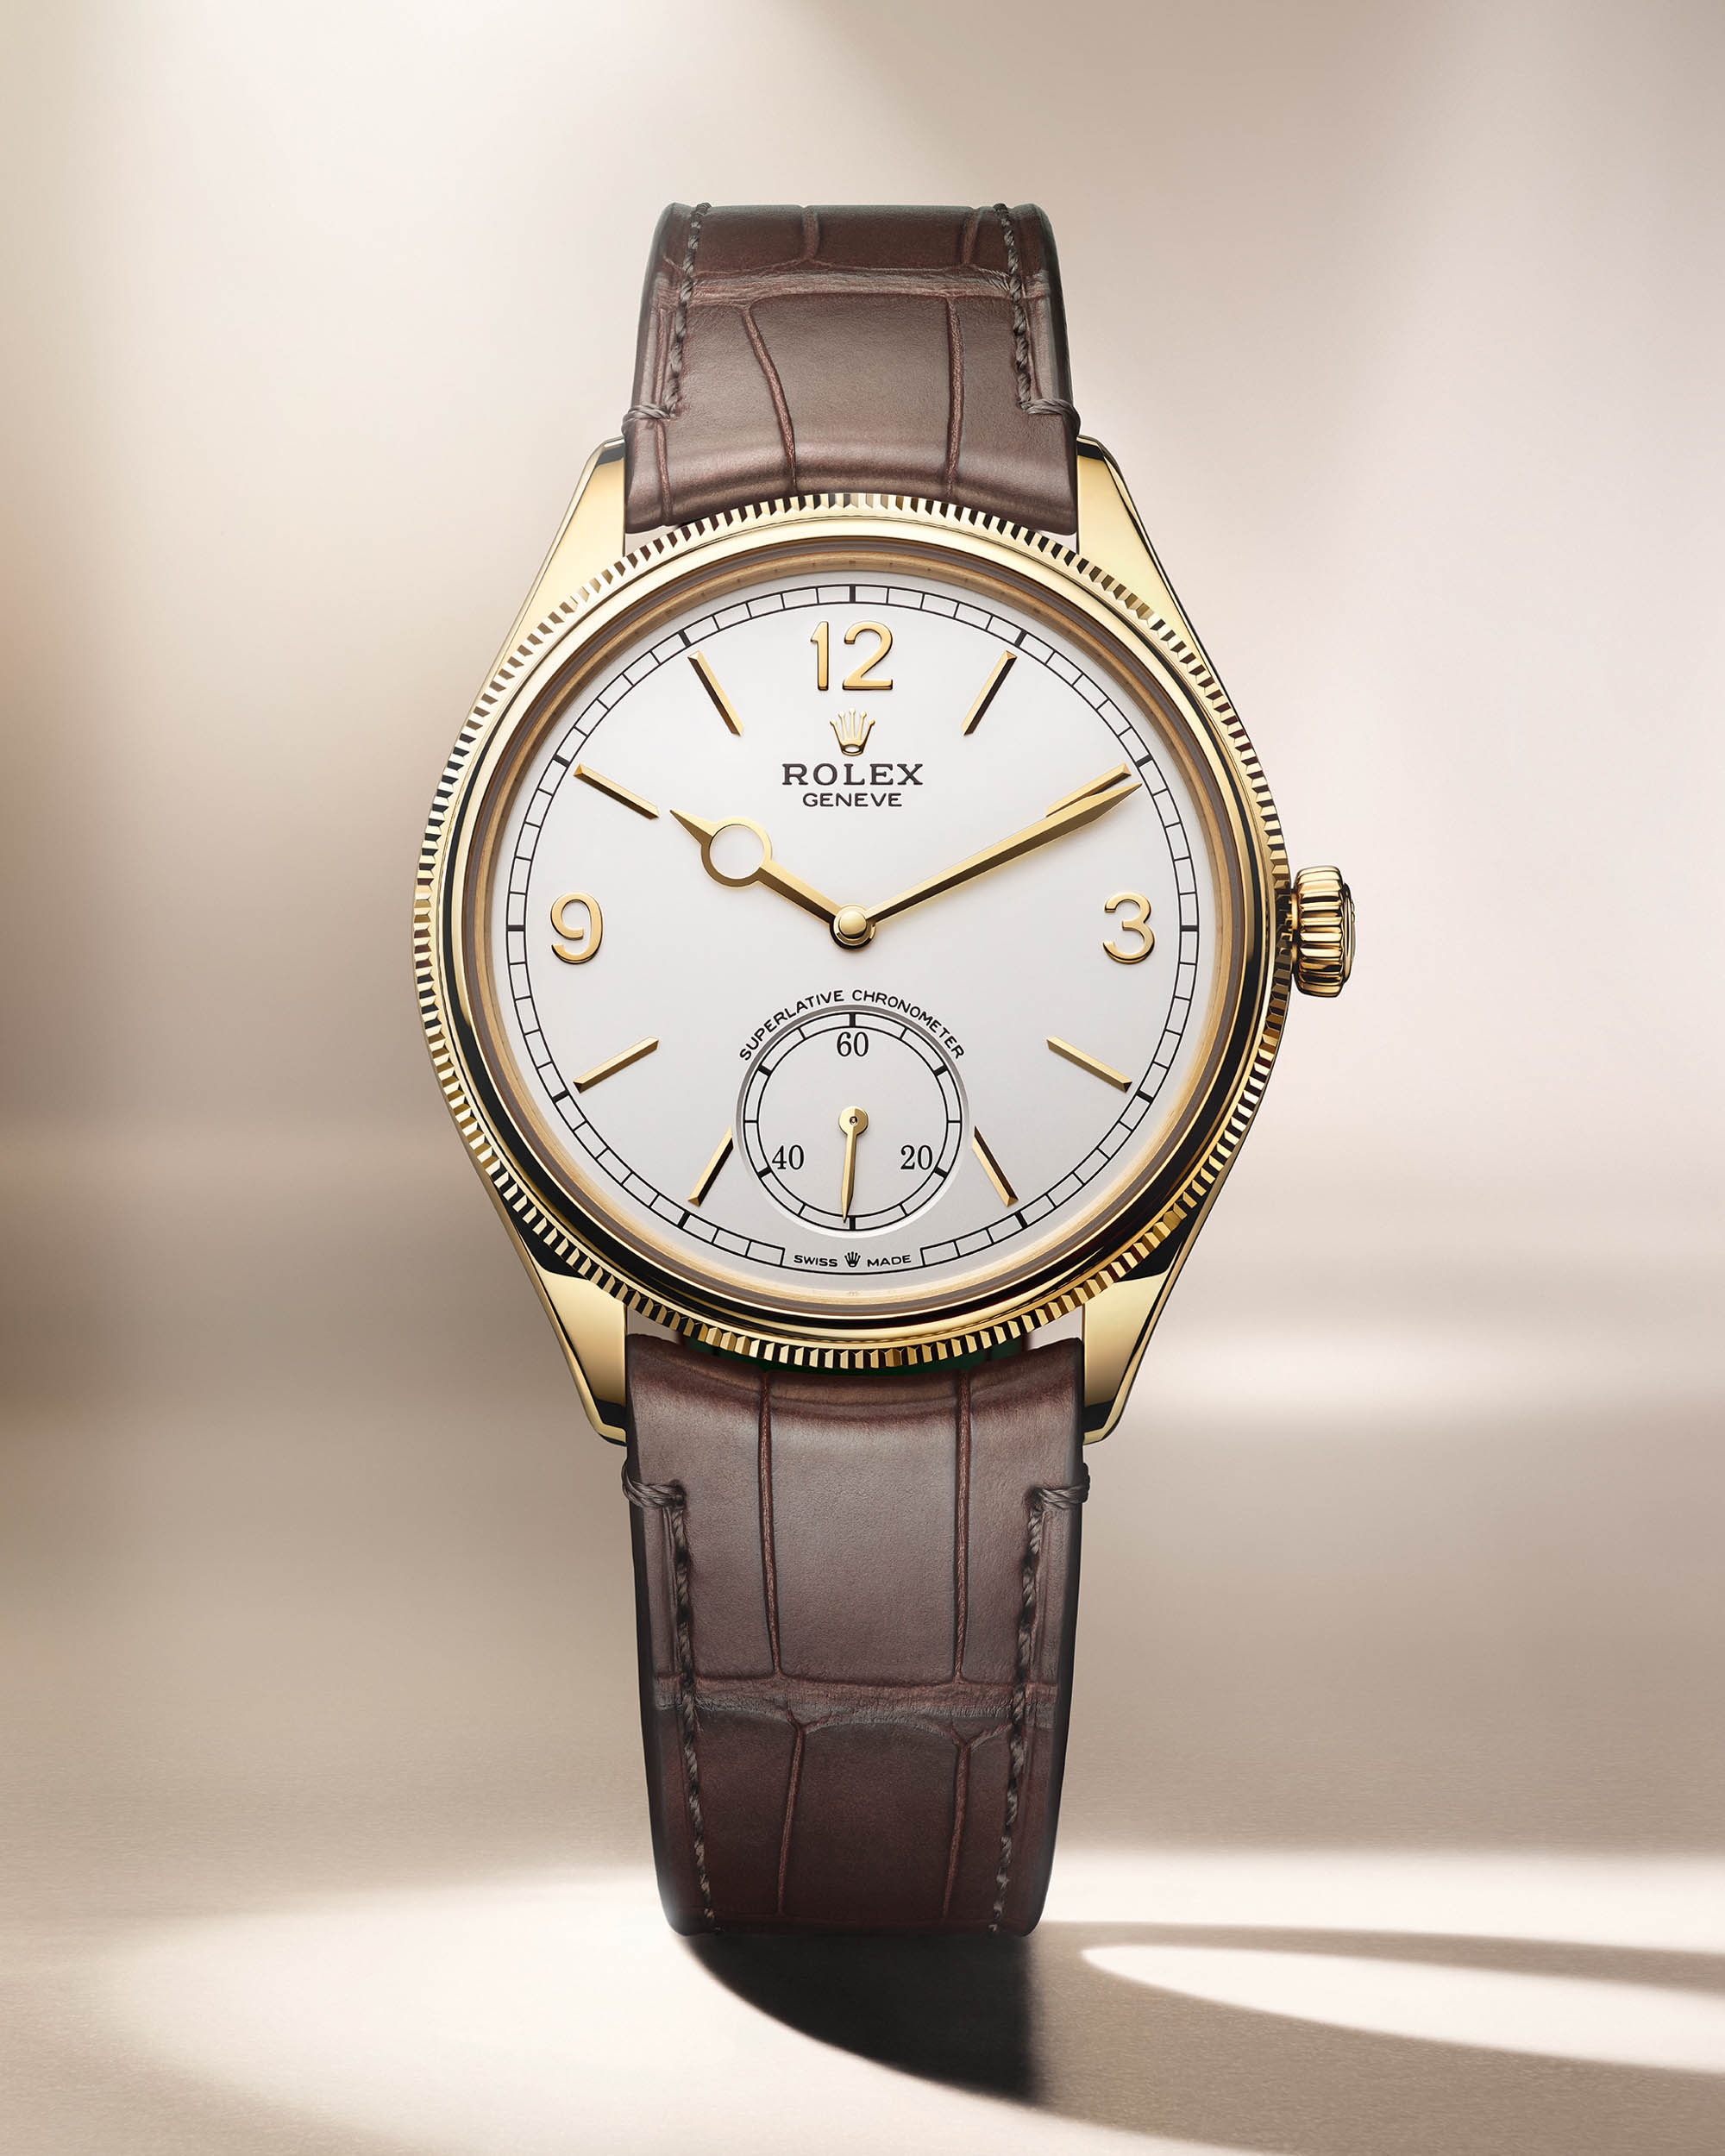 Eddike Ondartet tumor charter First Look: Rolex Perpetual 1908 Reference 52508 Is The Brand's First New Dress  Watch In Ages | aBlogtoWatch